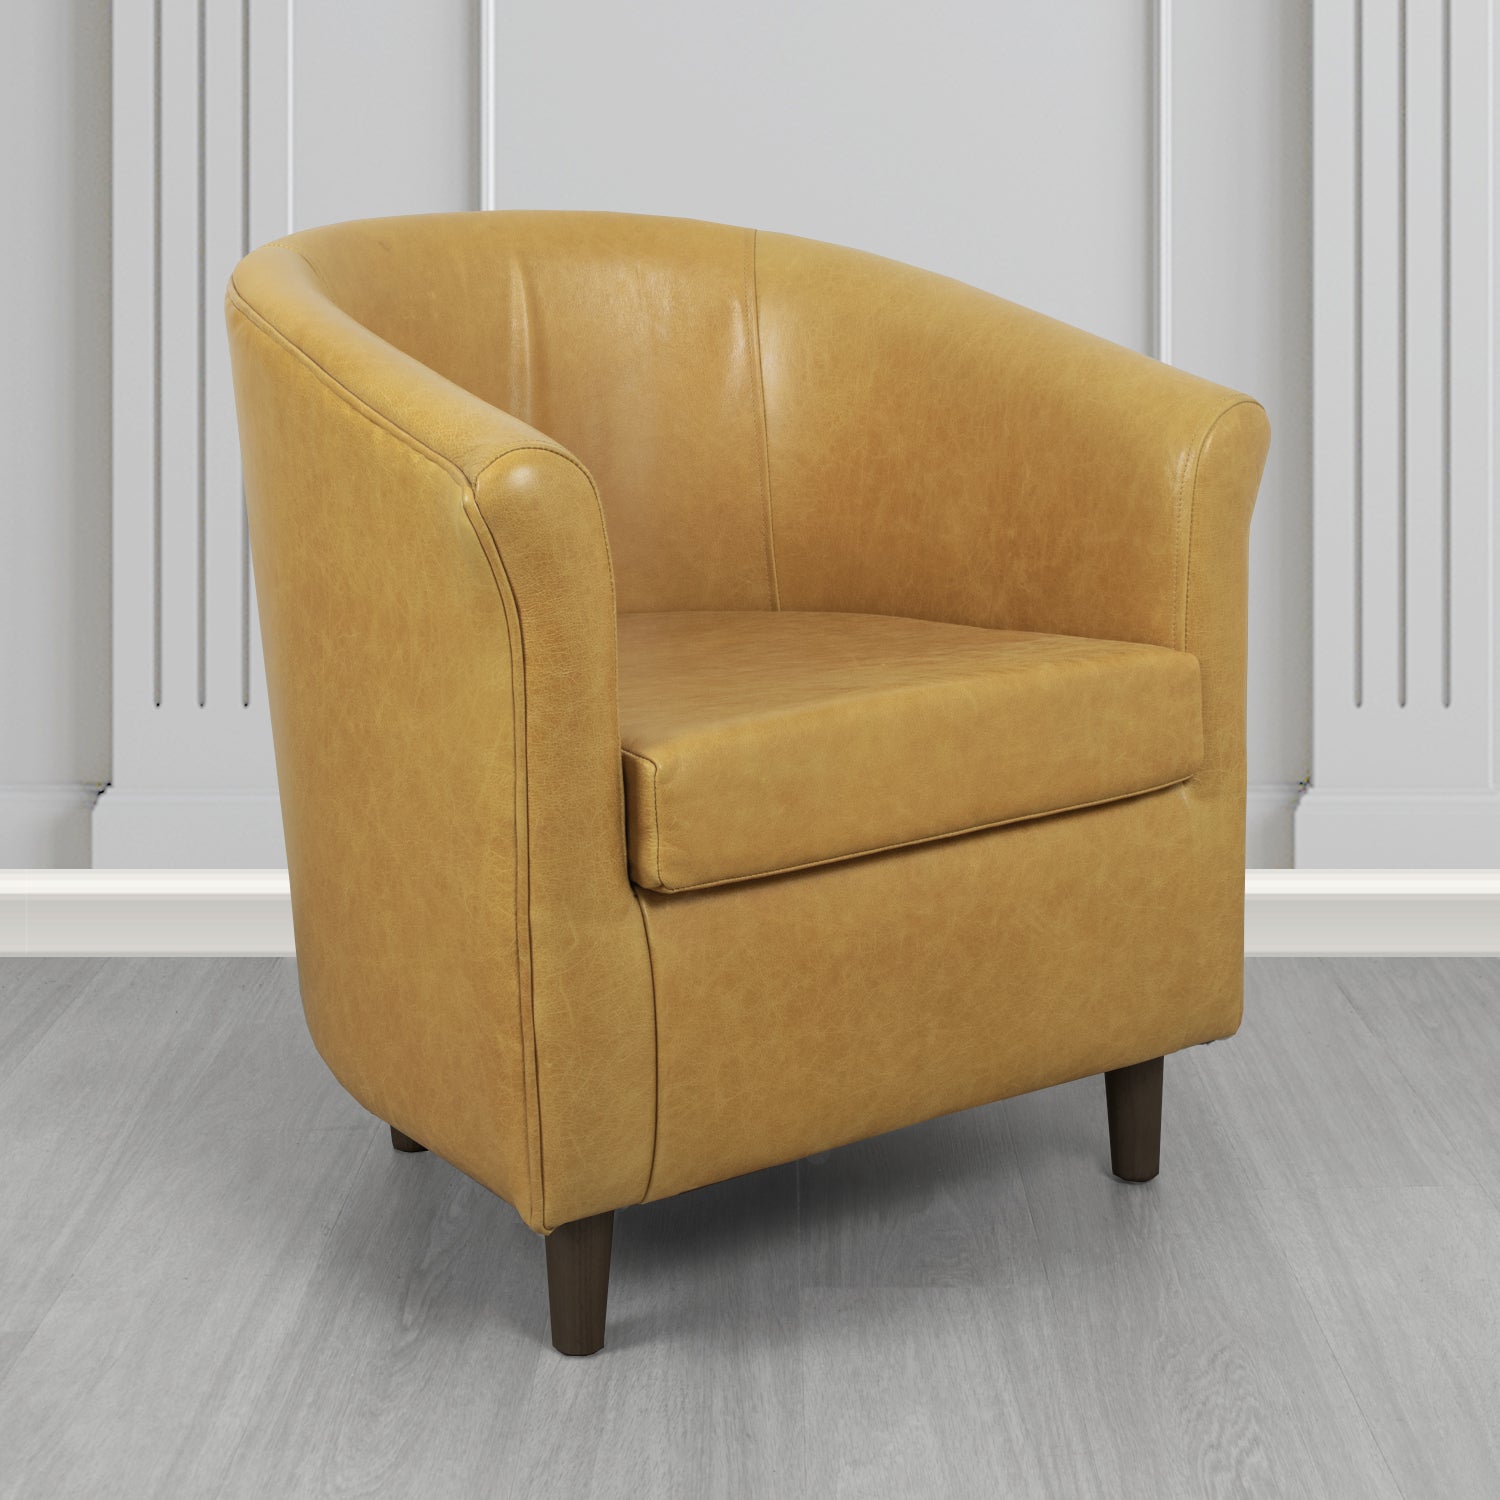 Tuscany Tub Chair in Crib 5 Old English Saddle Genuine Leather - The Tub Chair Shop